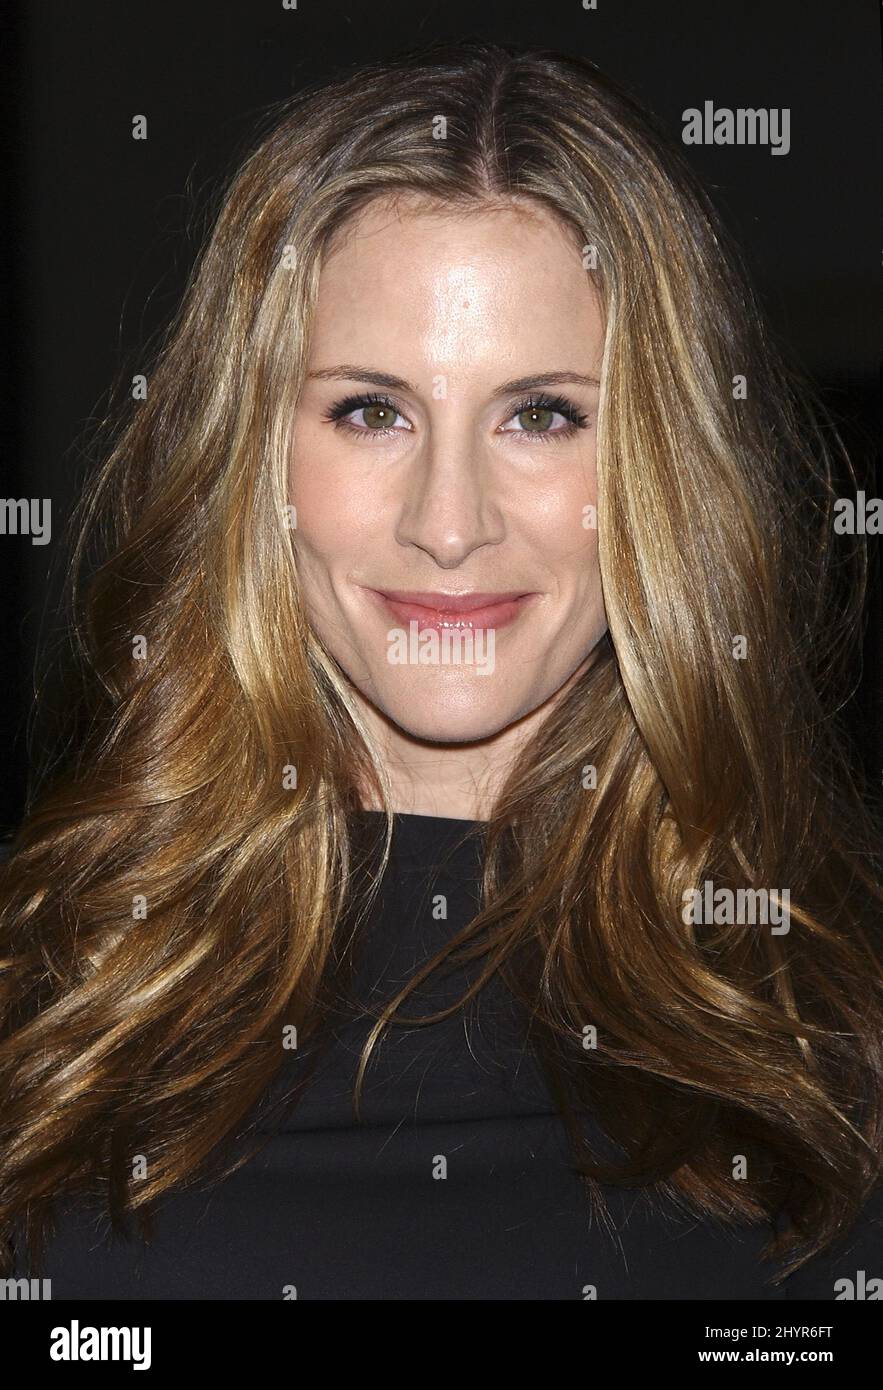 Emily Robison attends 'Runnin' Down A Dream: Tom Petty and the Heartbreakers' World Premiere in California. Stock Photo